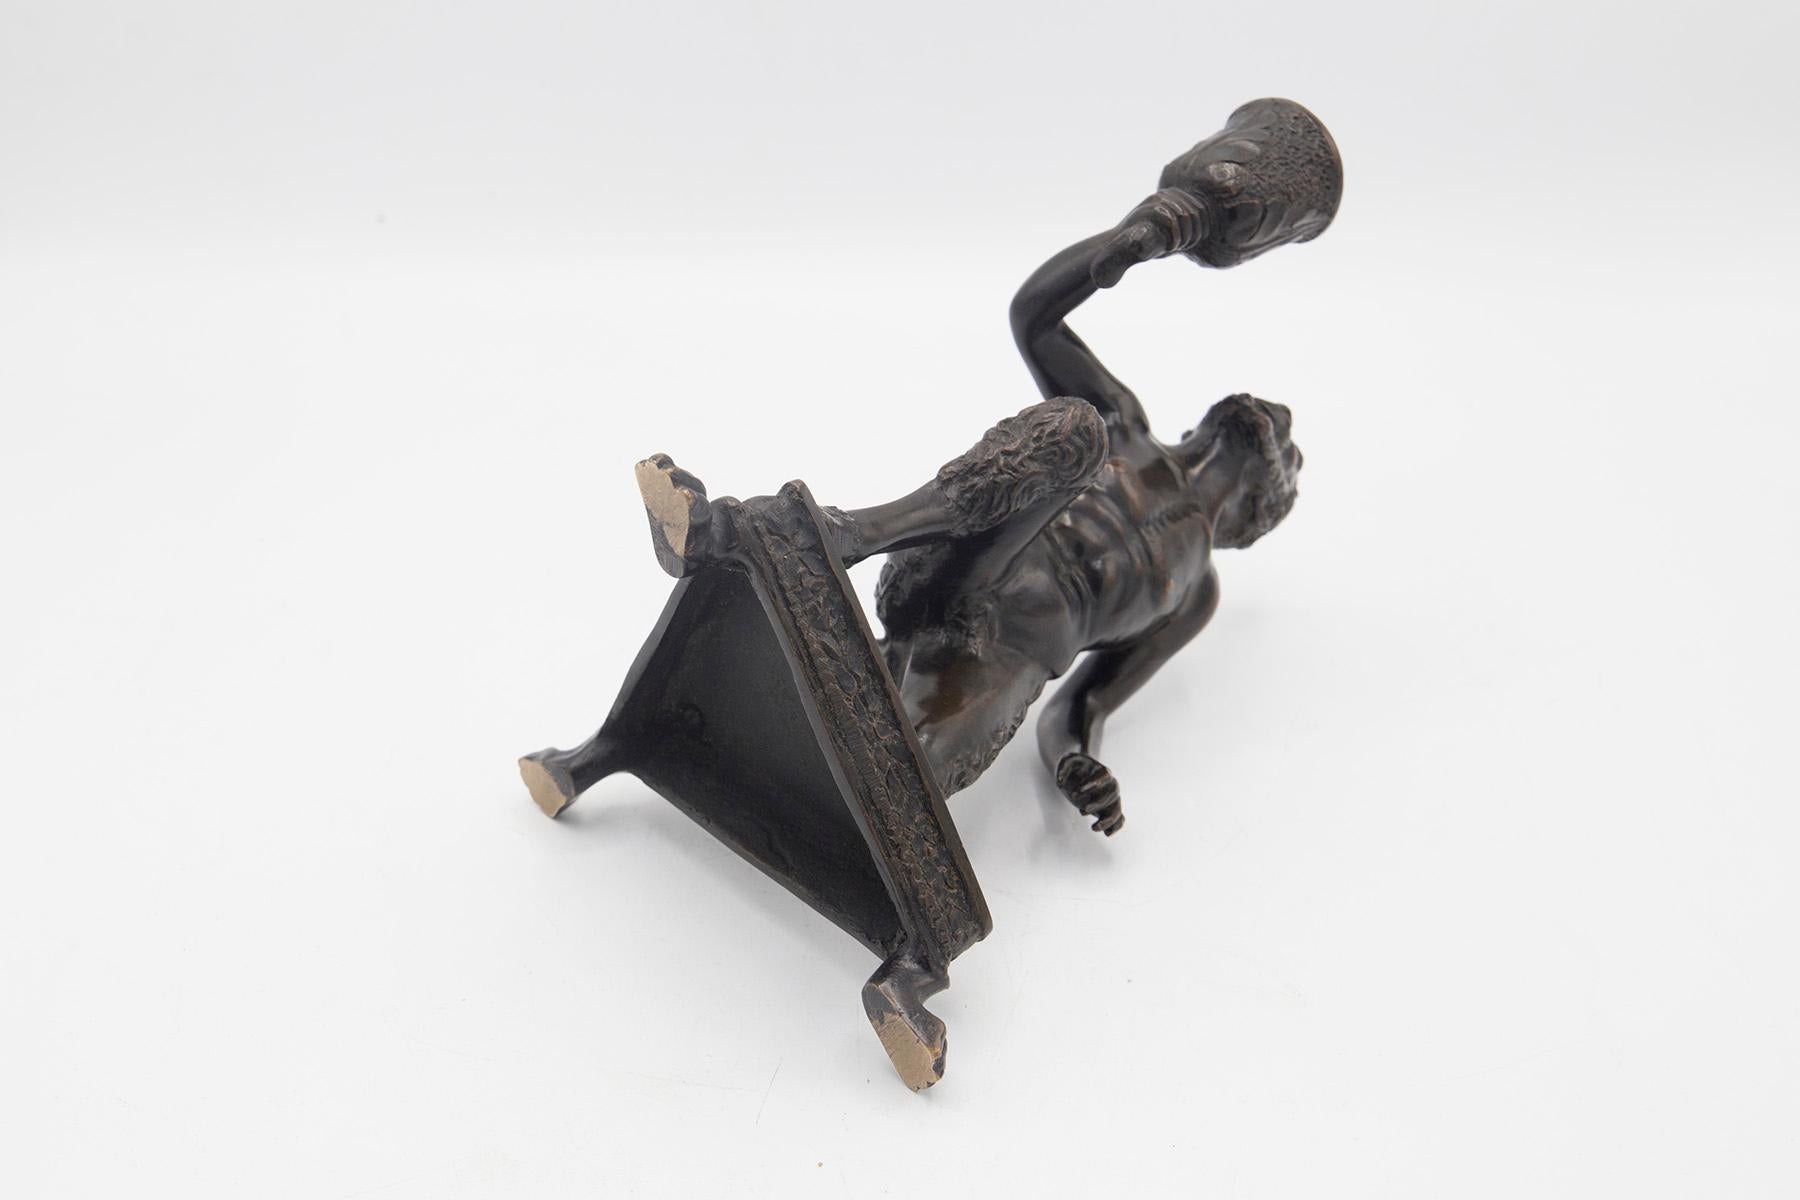 Calzetta Da Ravenna Severo Candlestick Depicting a Kneeling Satyr In Good Condition For Sale In Milano, IT